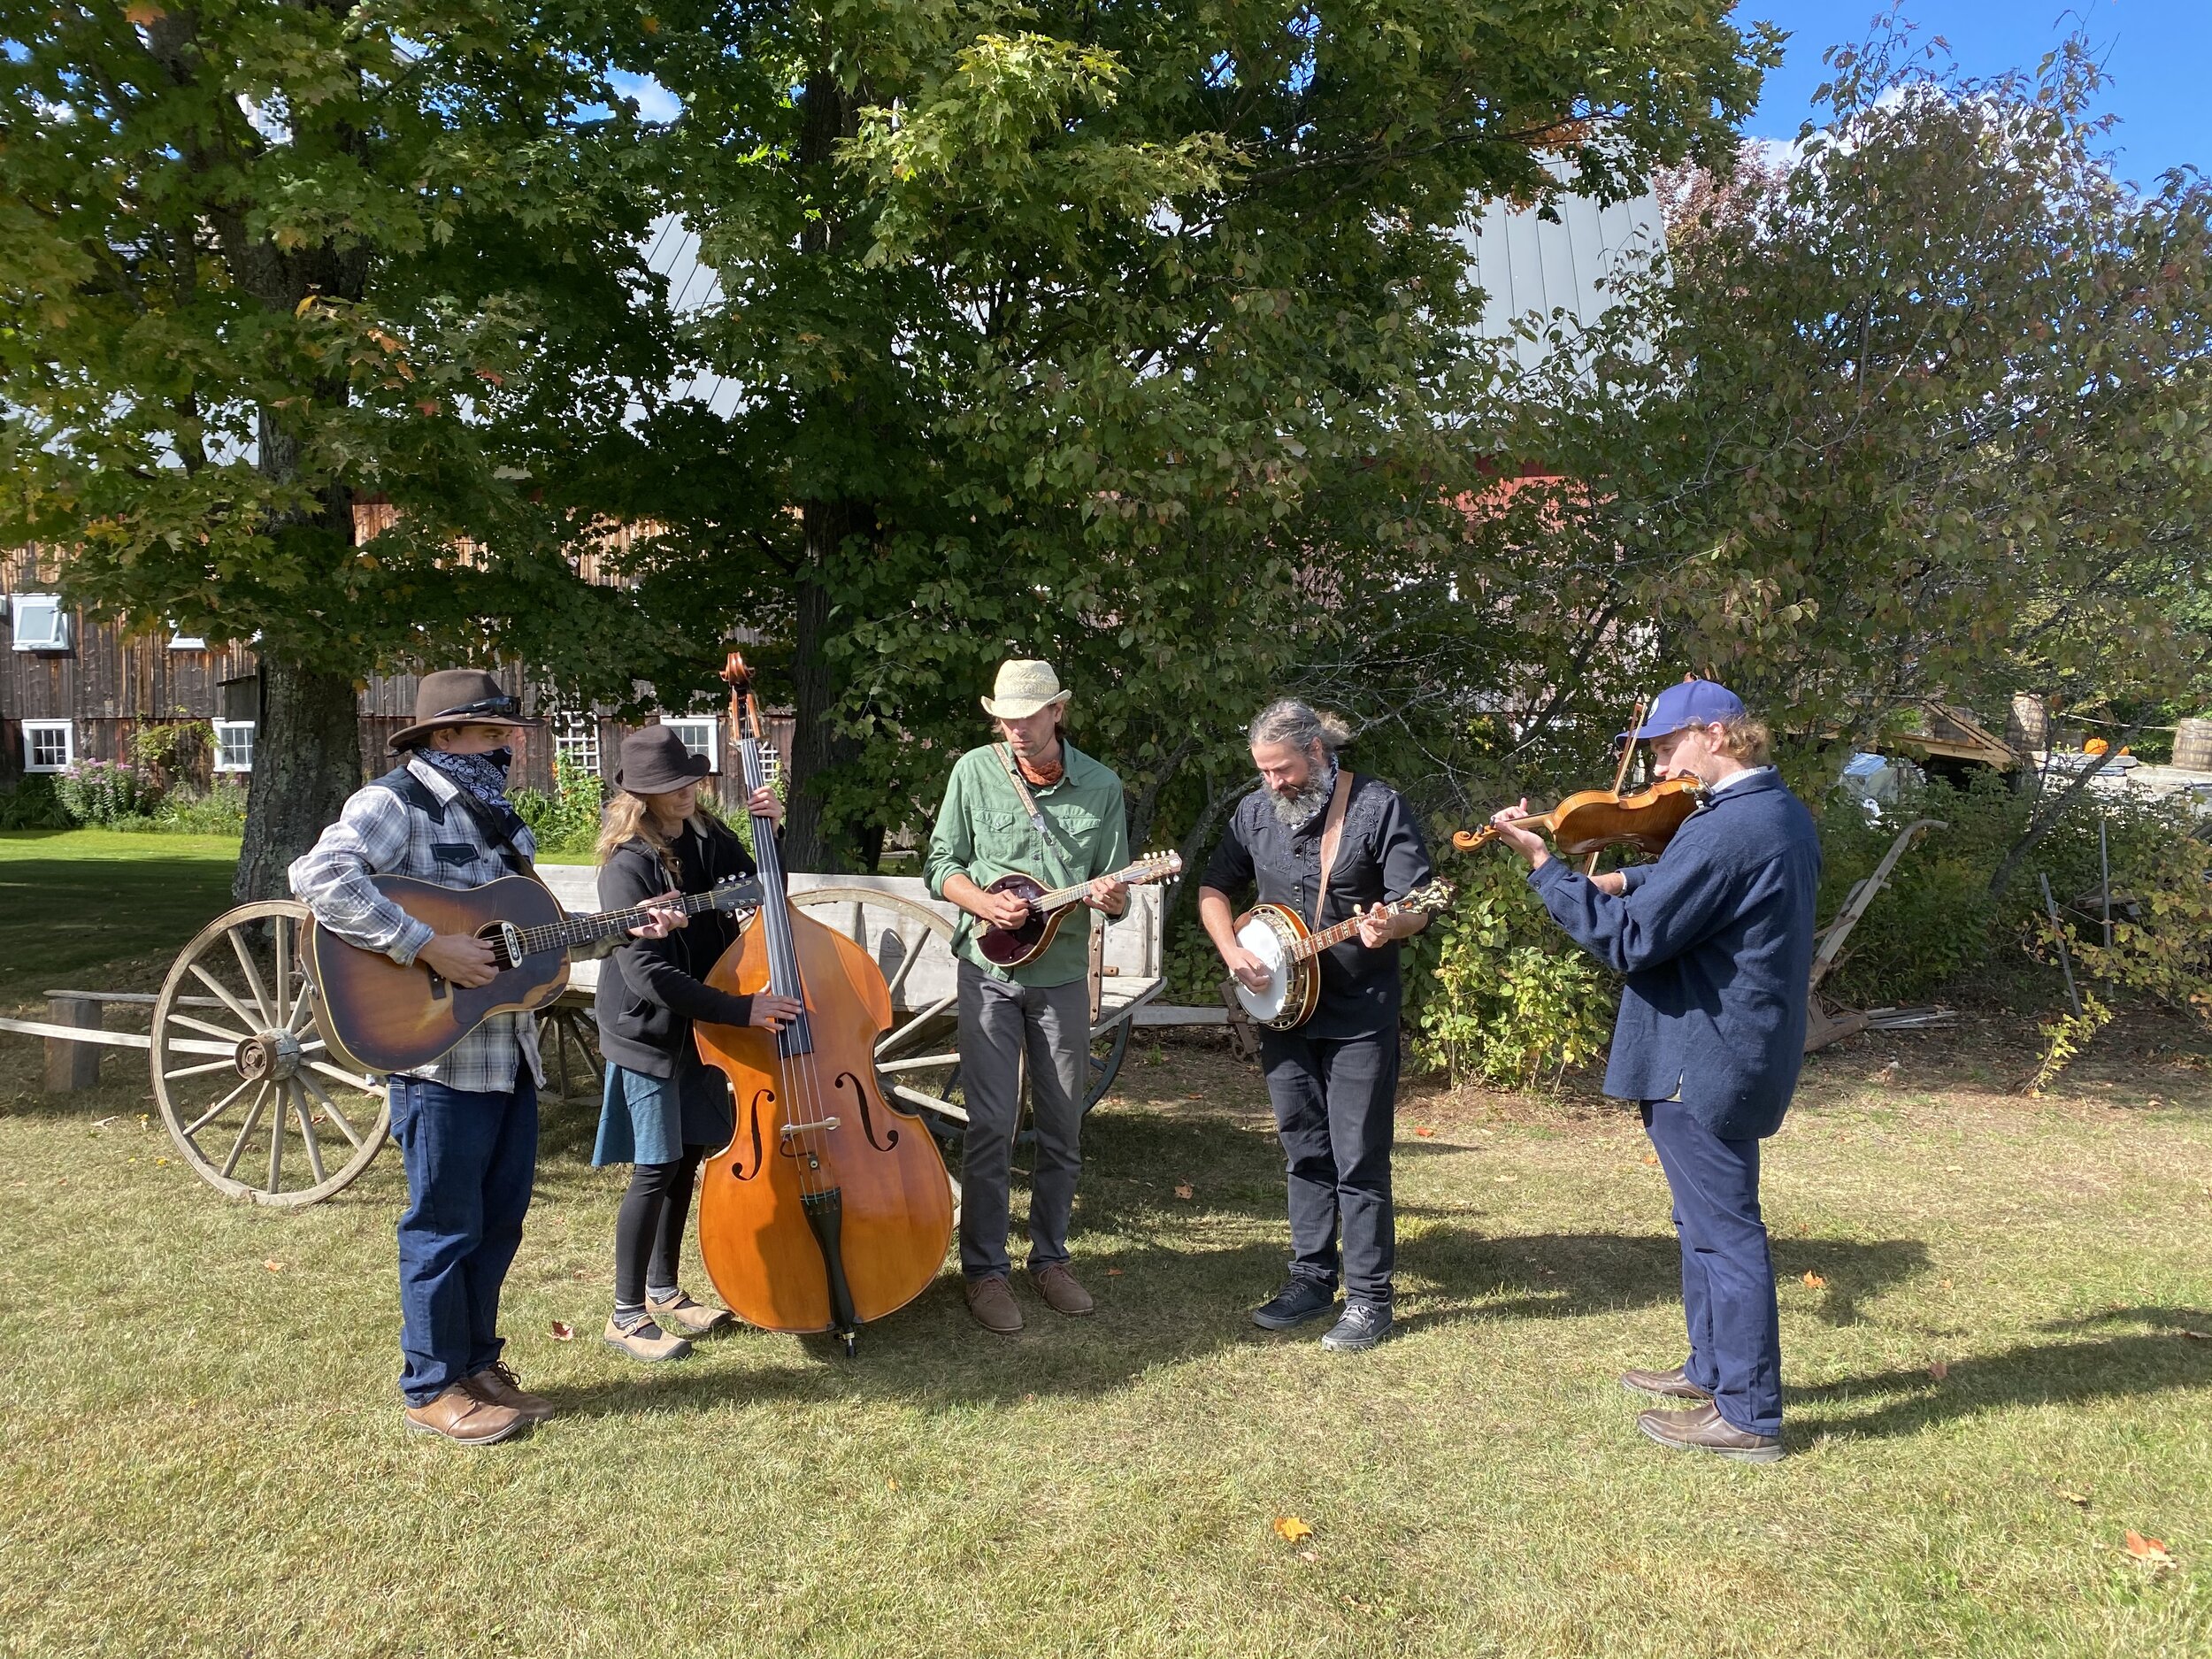 A bluegrass band playing by a rustic wagon outside